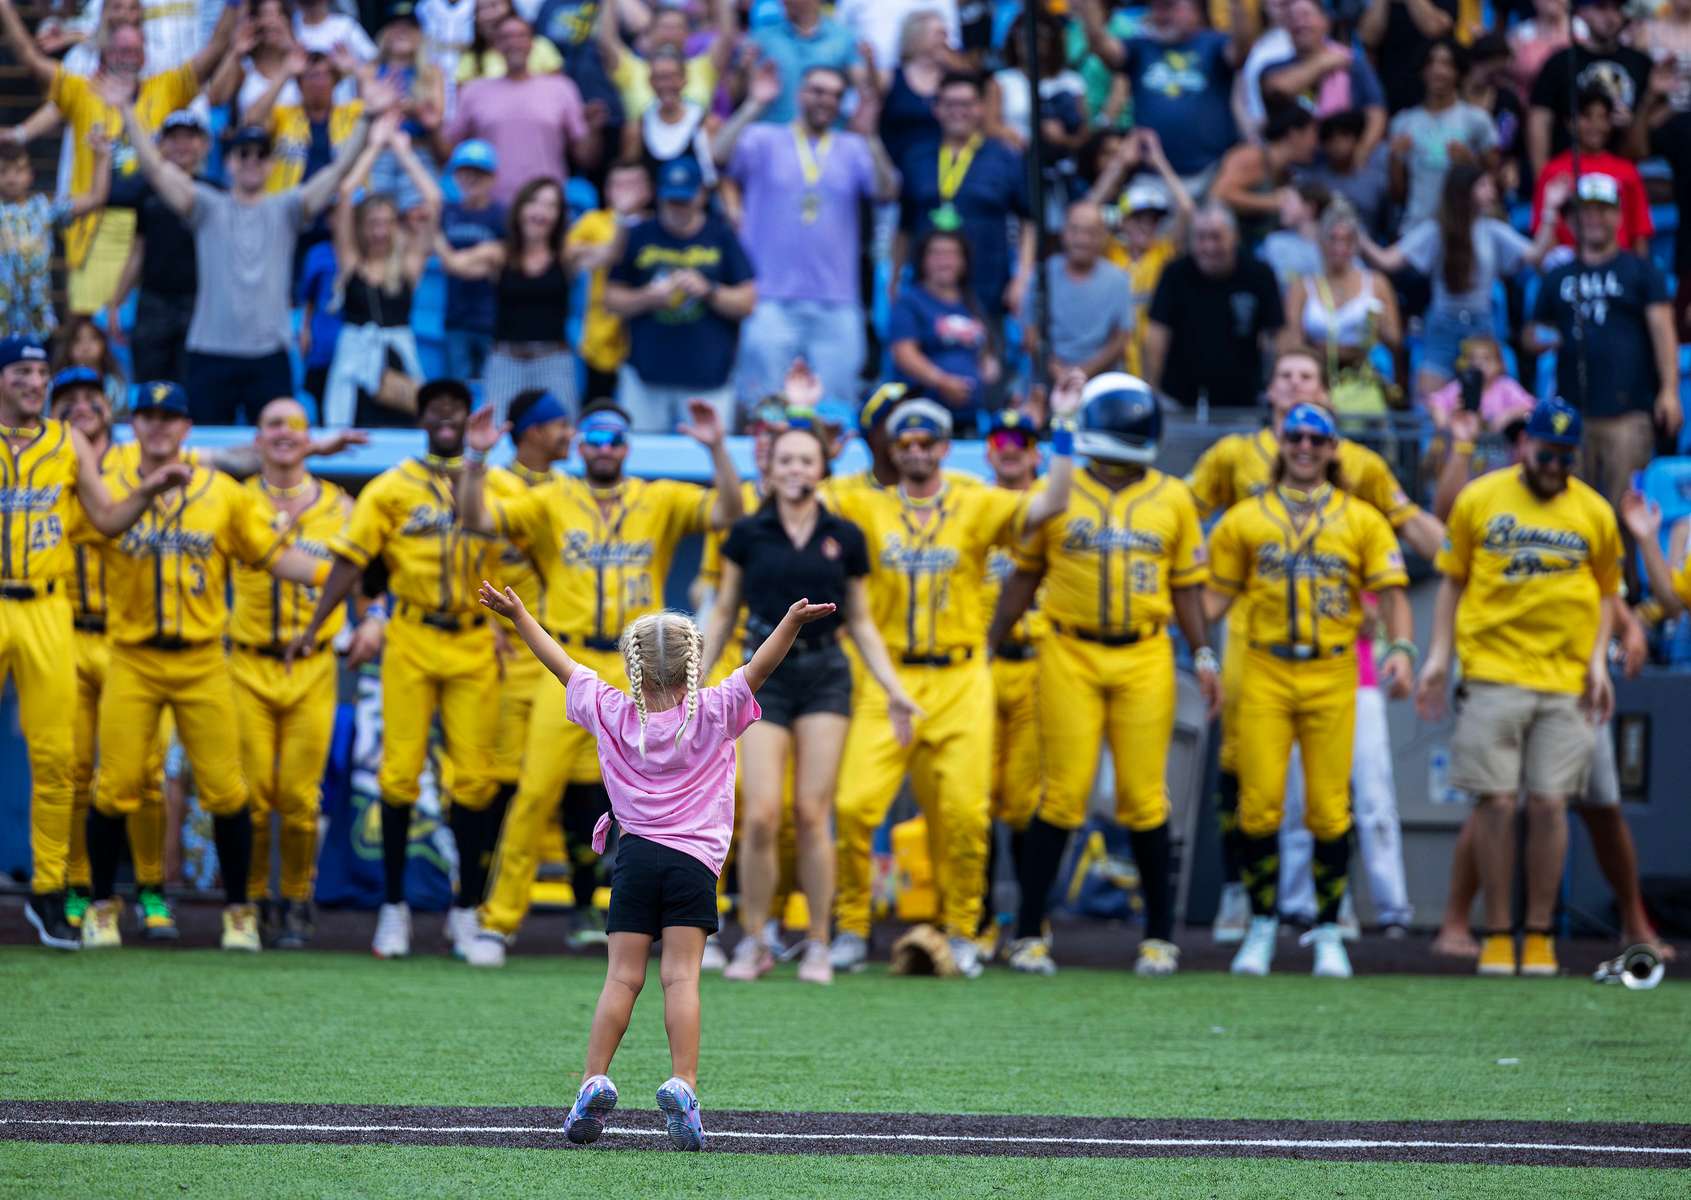 A young fan leads the Savannah Bananas and fans in a dance routine  before the game against the Party Animals at Richmond County Bank Ball Park on August 12, 2023 in New York City.  